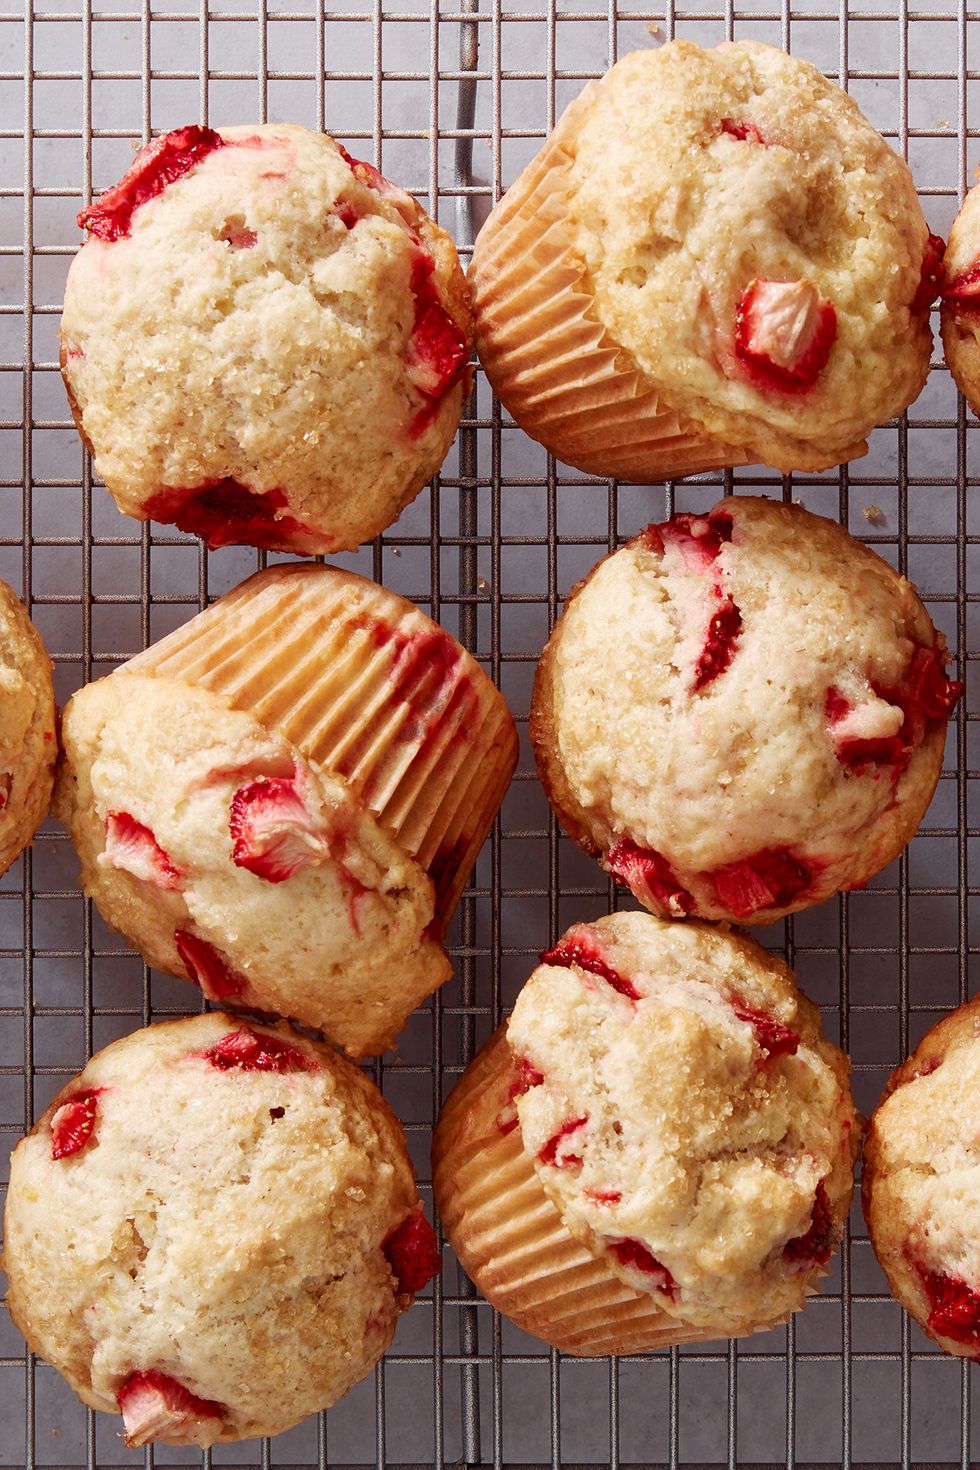 19 Tips You Need To Bake Better Muffins